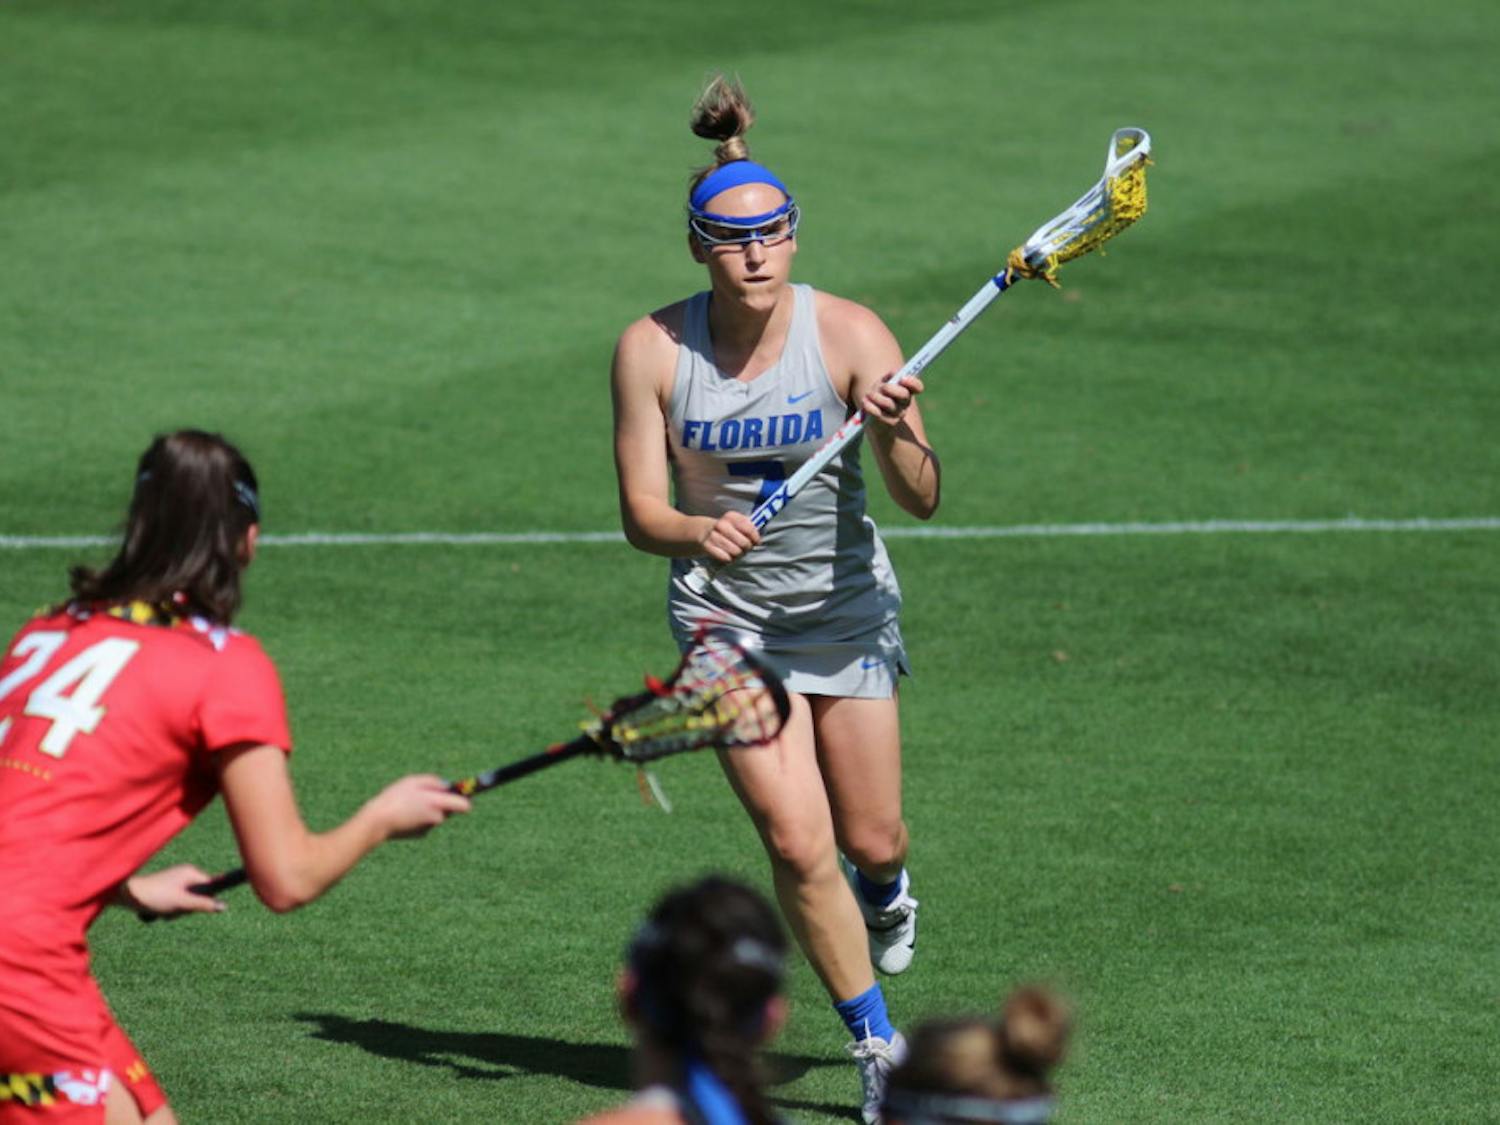 Senior Shayna Pirreca and her sister, Sydney, led UF to victory over Colorado in the second round of the NCAA Tournament on Sunday with a combined seven goals.